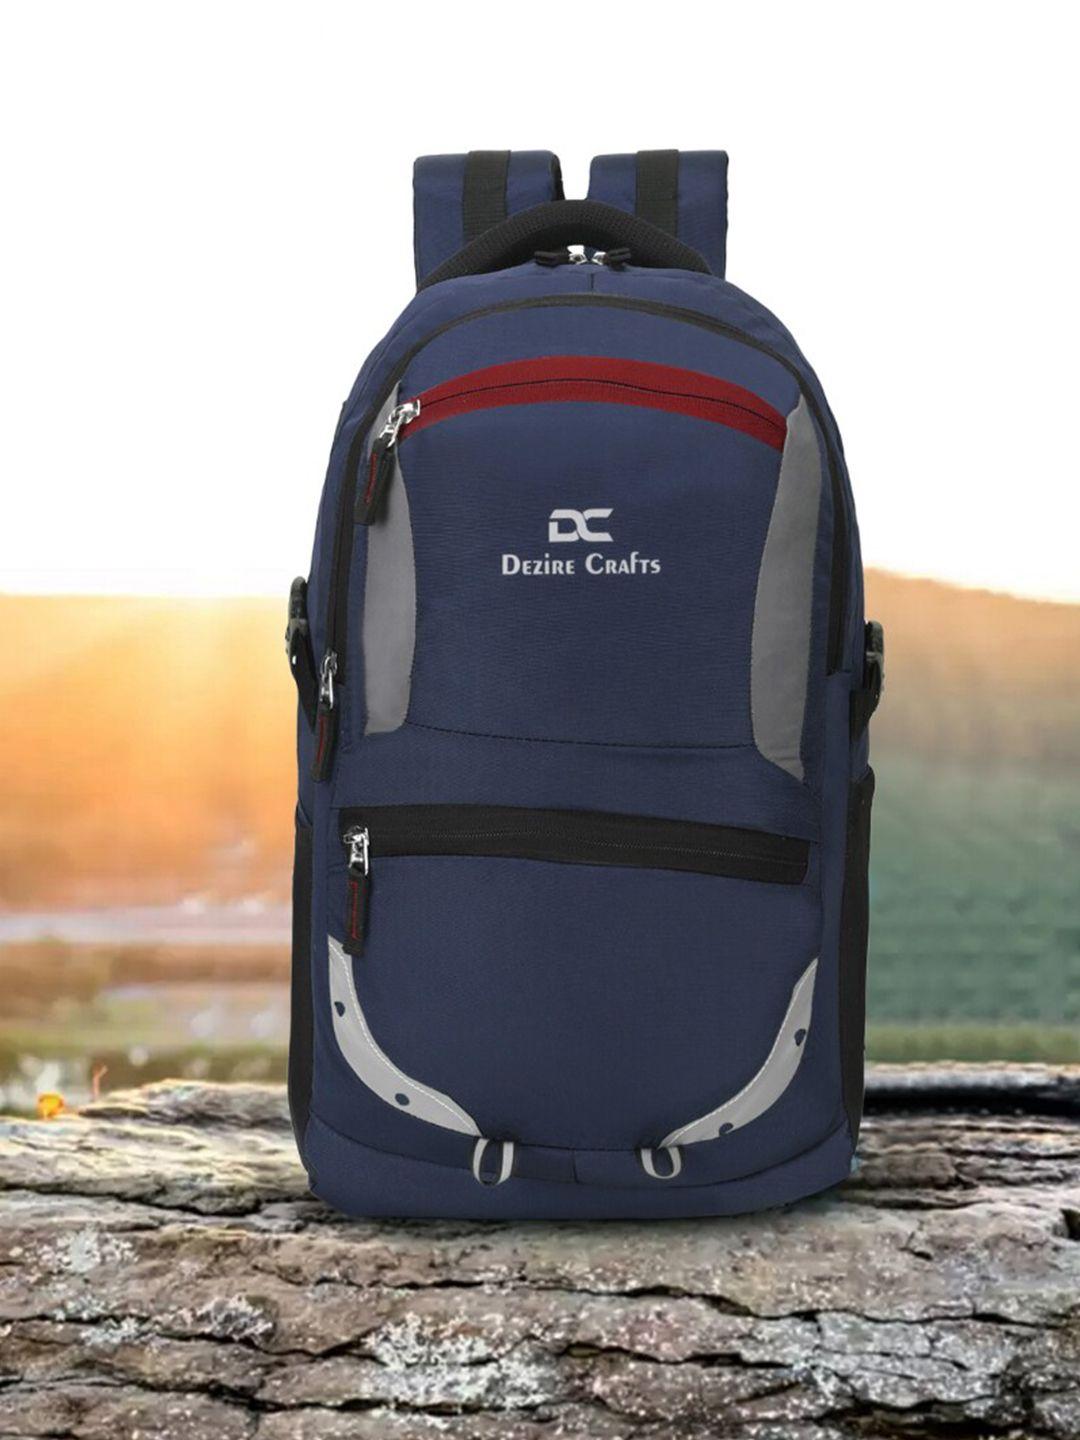 dezire crafts unisex navy blue & grey backpack with reflective strip